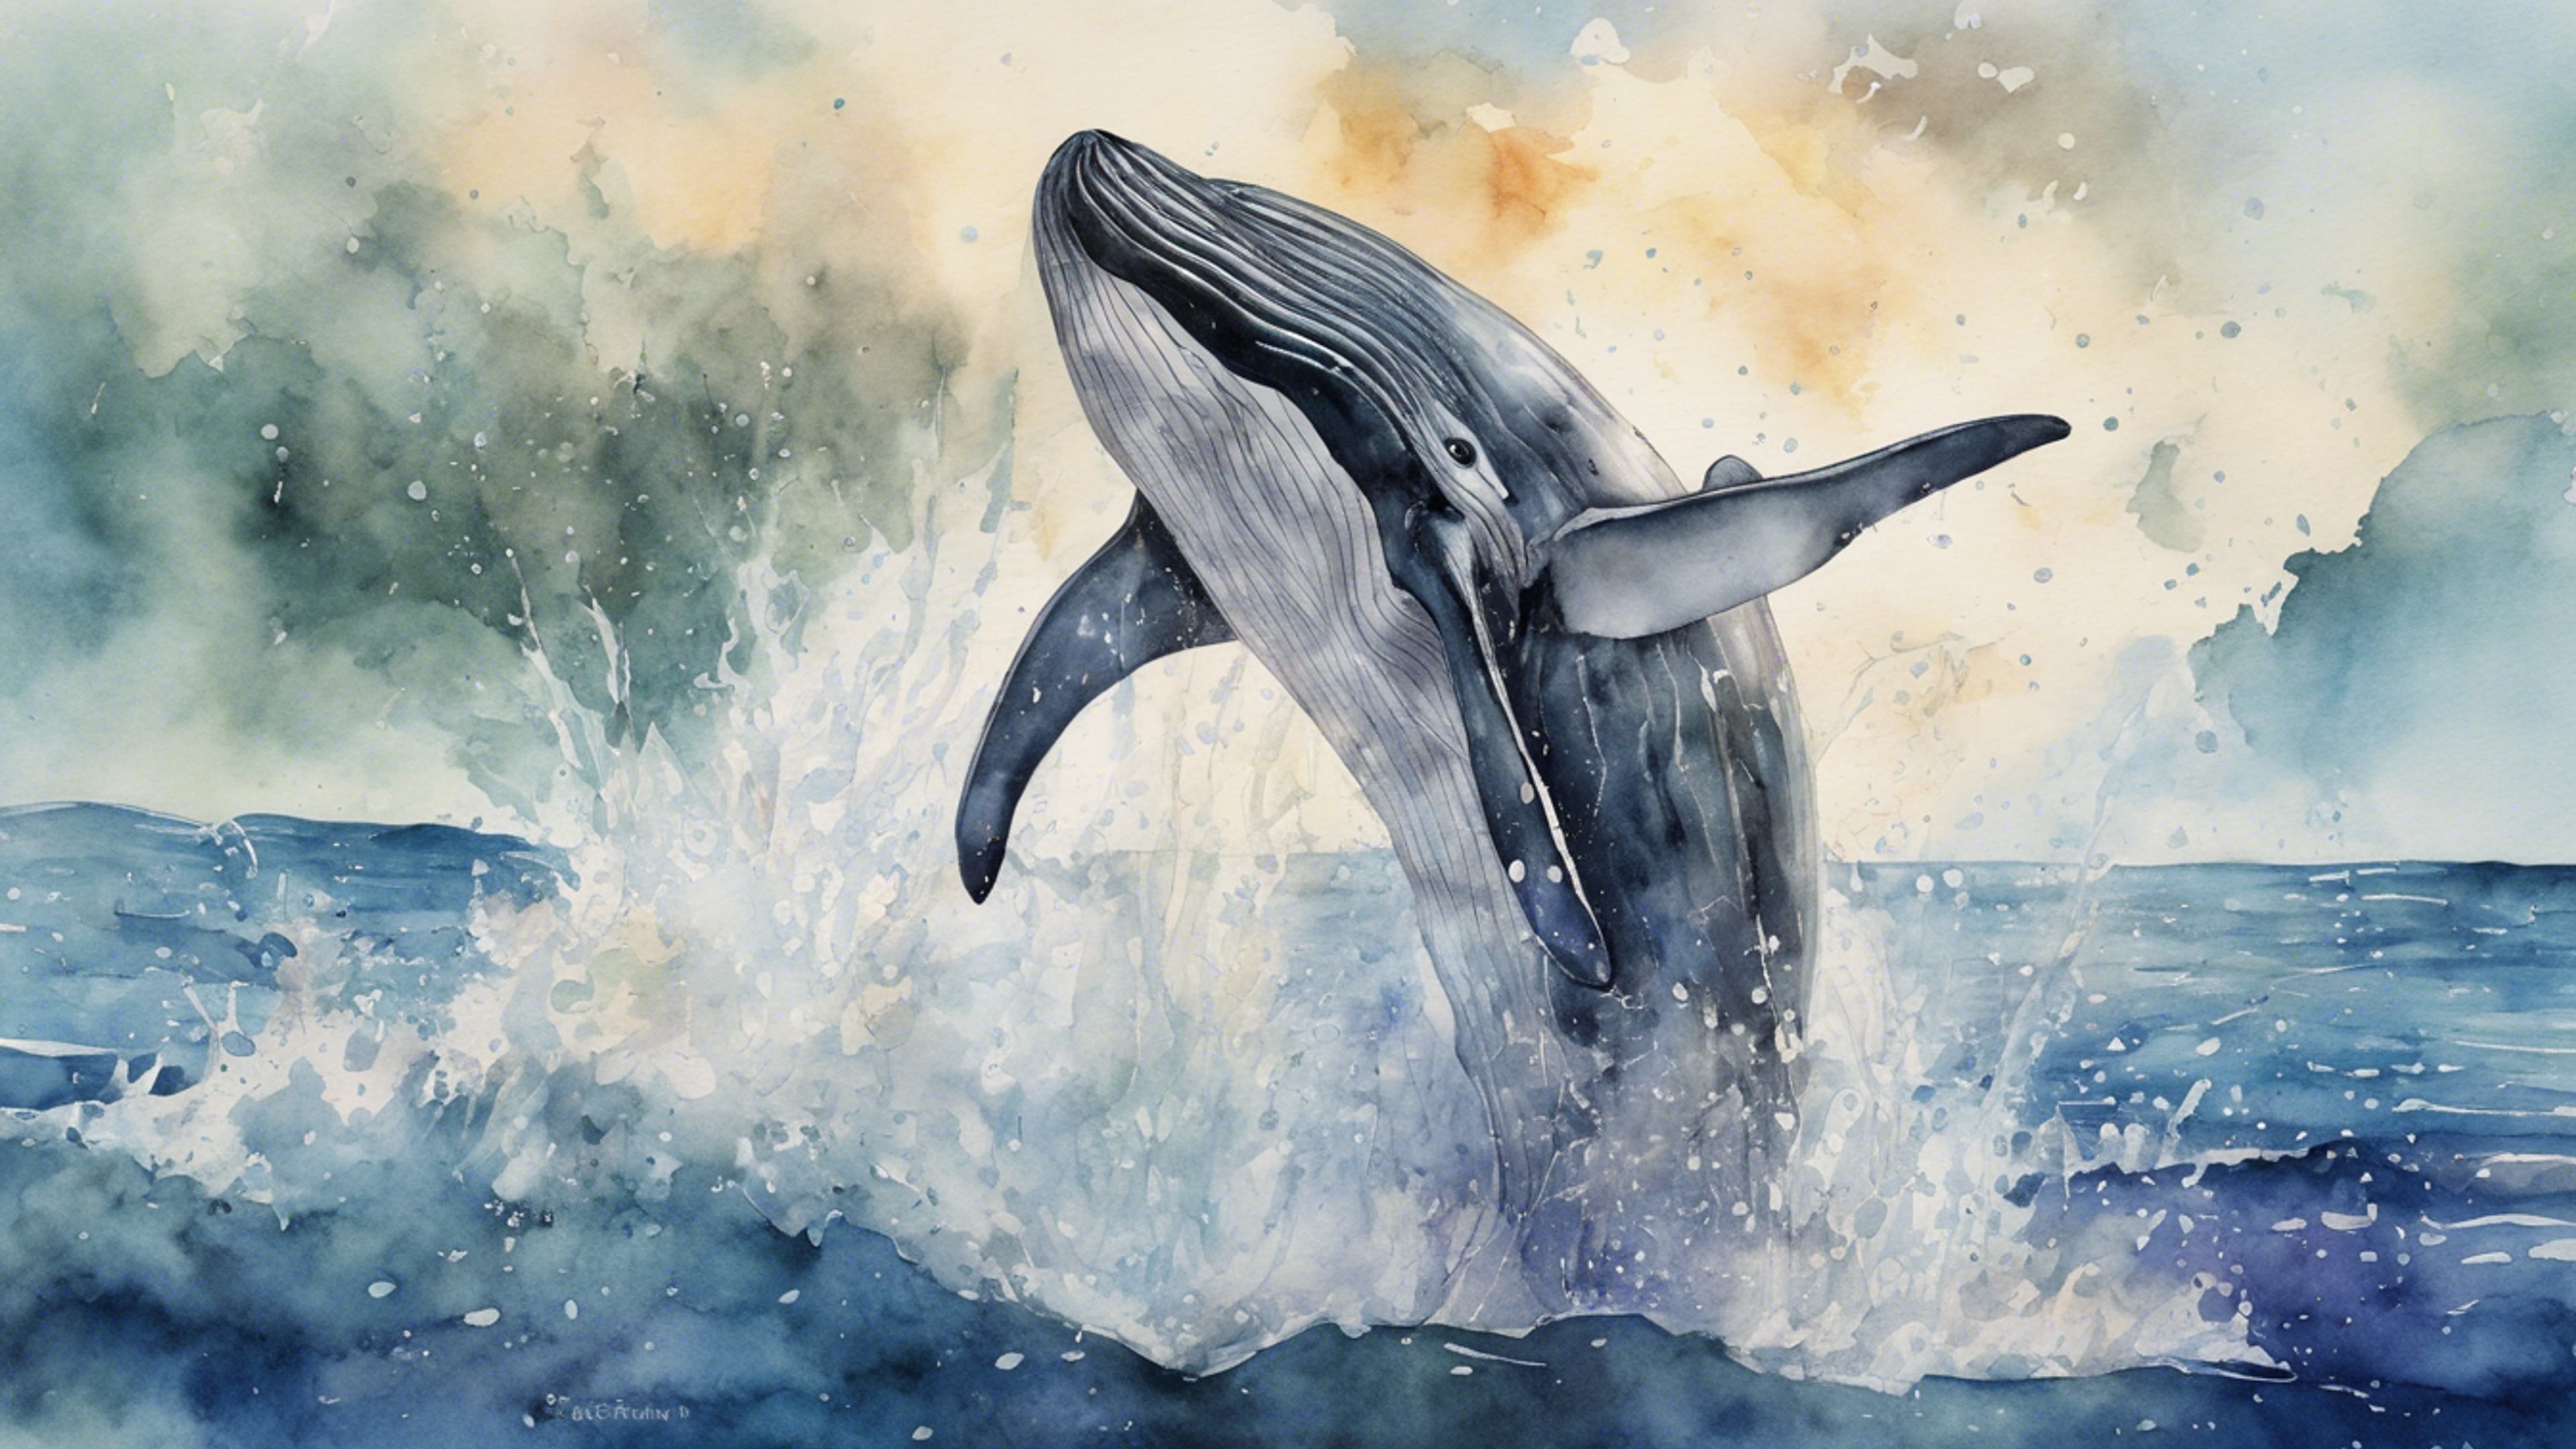 Watercolor painting showcasing a breaching minke whale with a towering splash of water around it.壁紙[80e4a5c981f74ce1b67c]